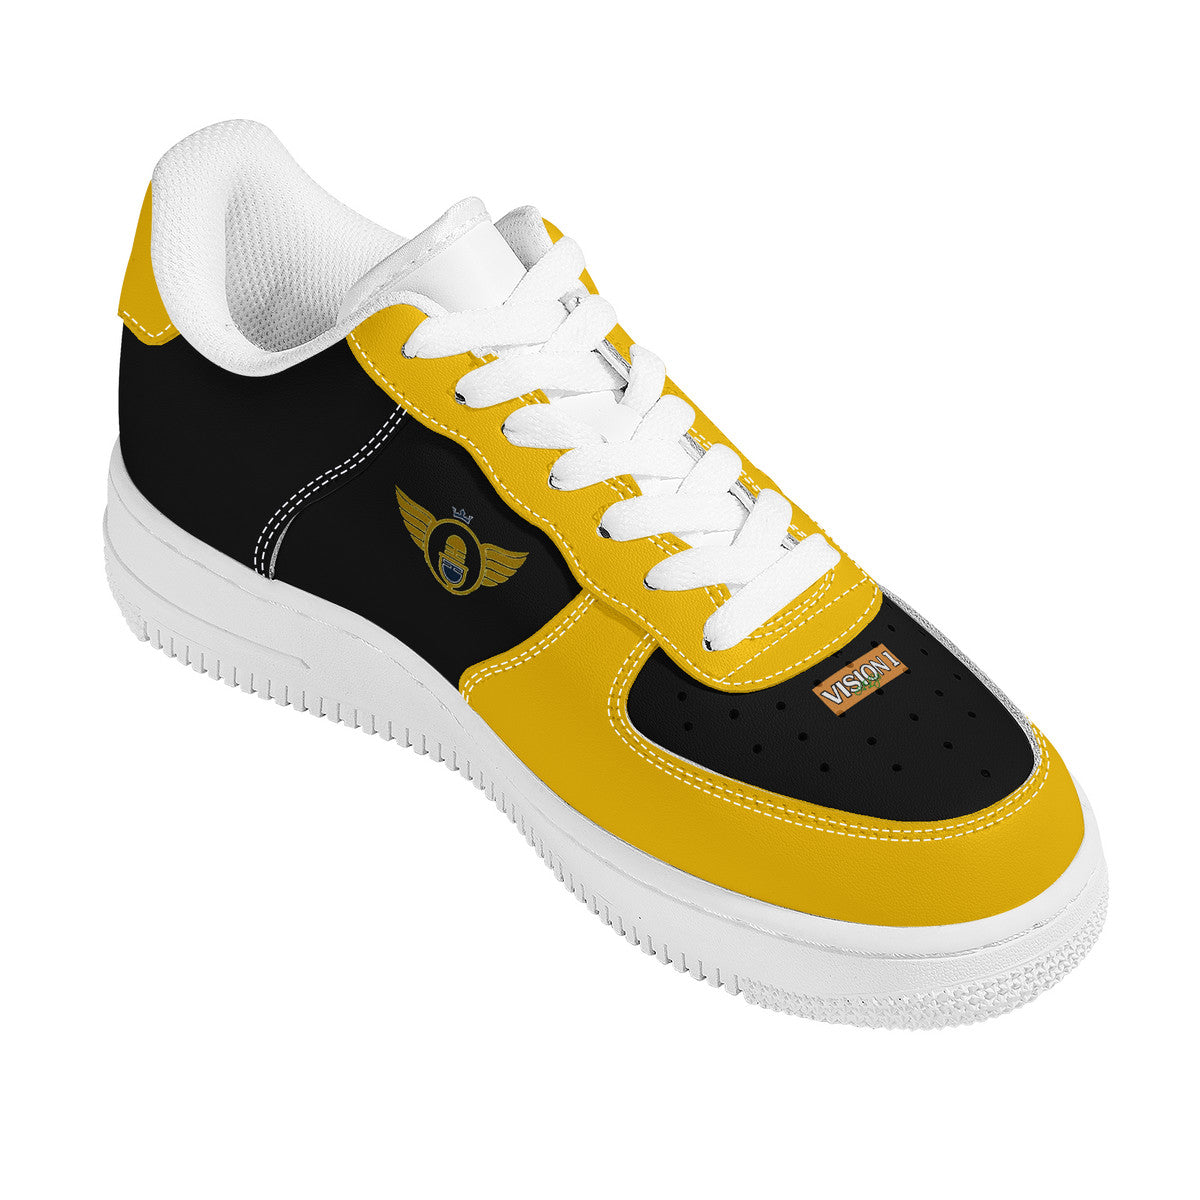 Gold Series - Black and Gold | Low Top Customized | Shoe Zero